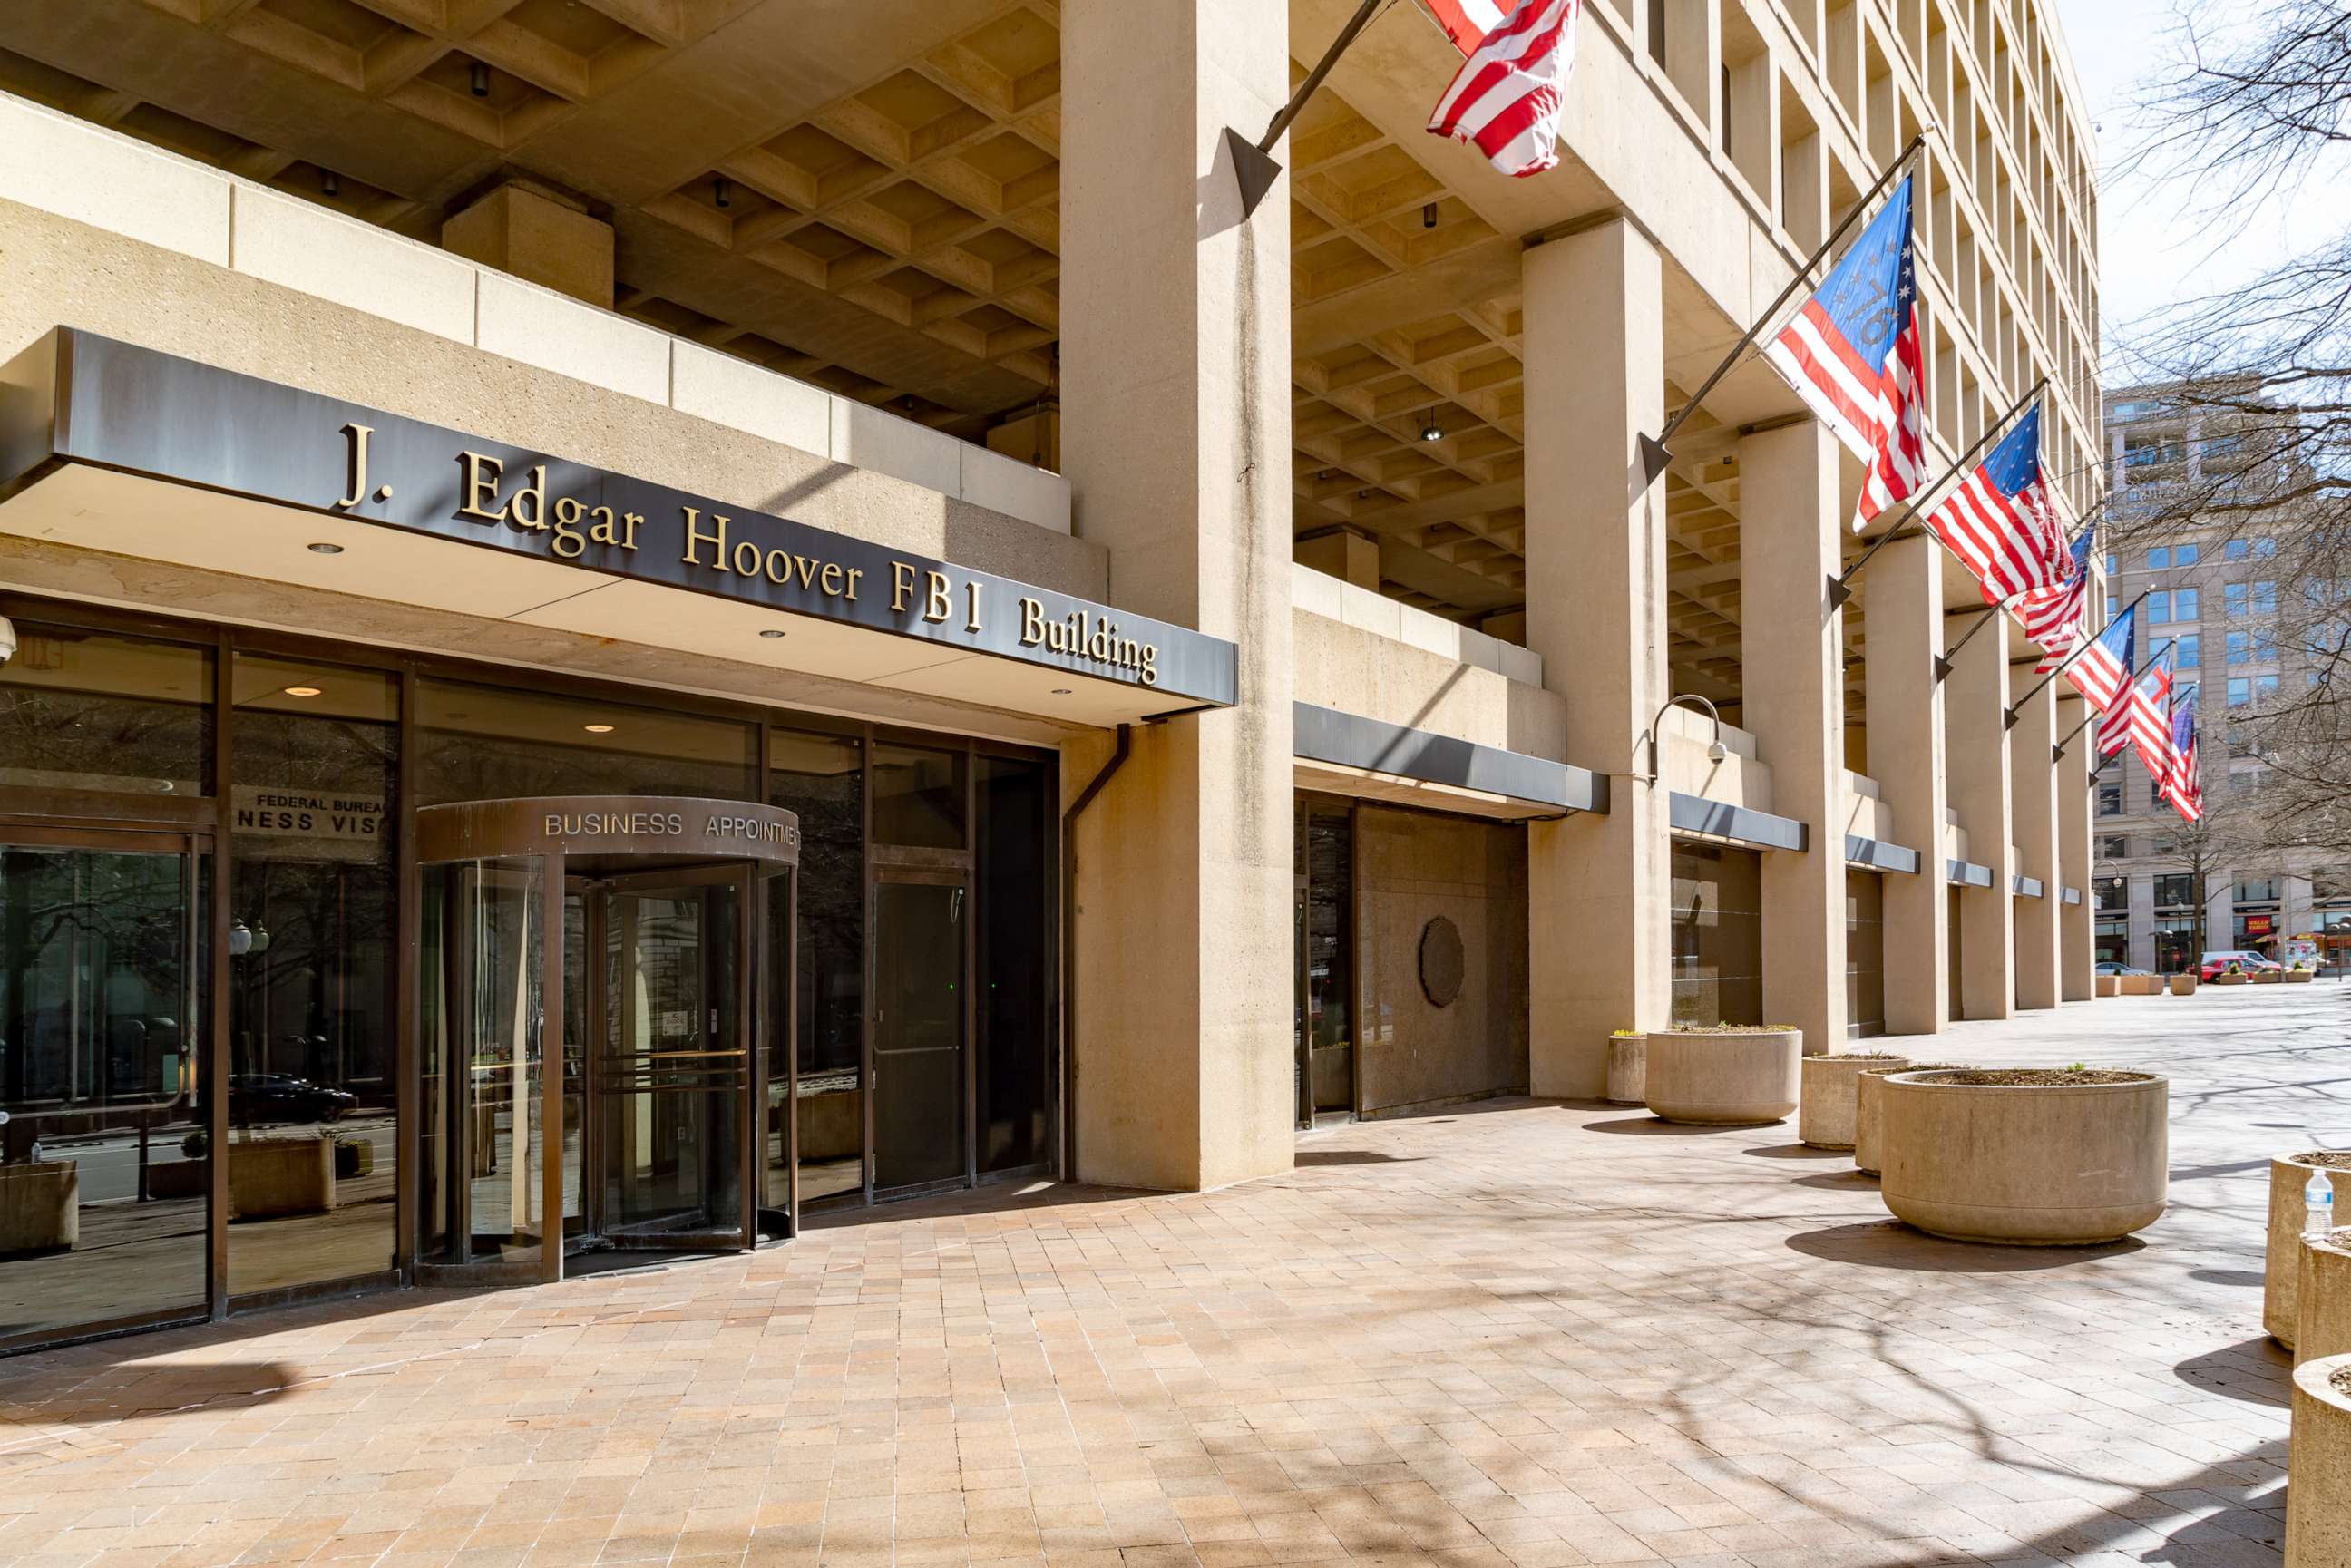 PHOTO: The FBI building in Washington D.C. in an undated stock image.